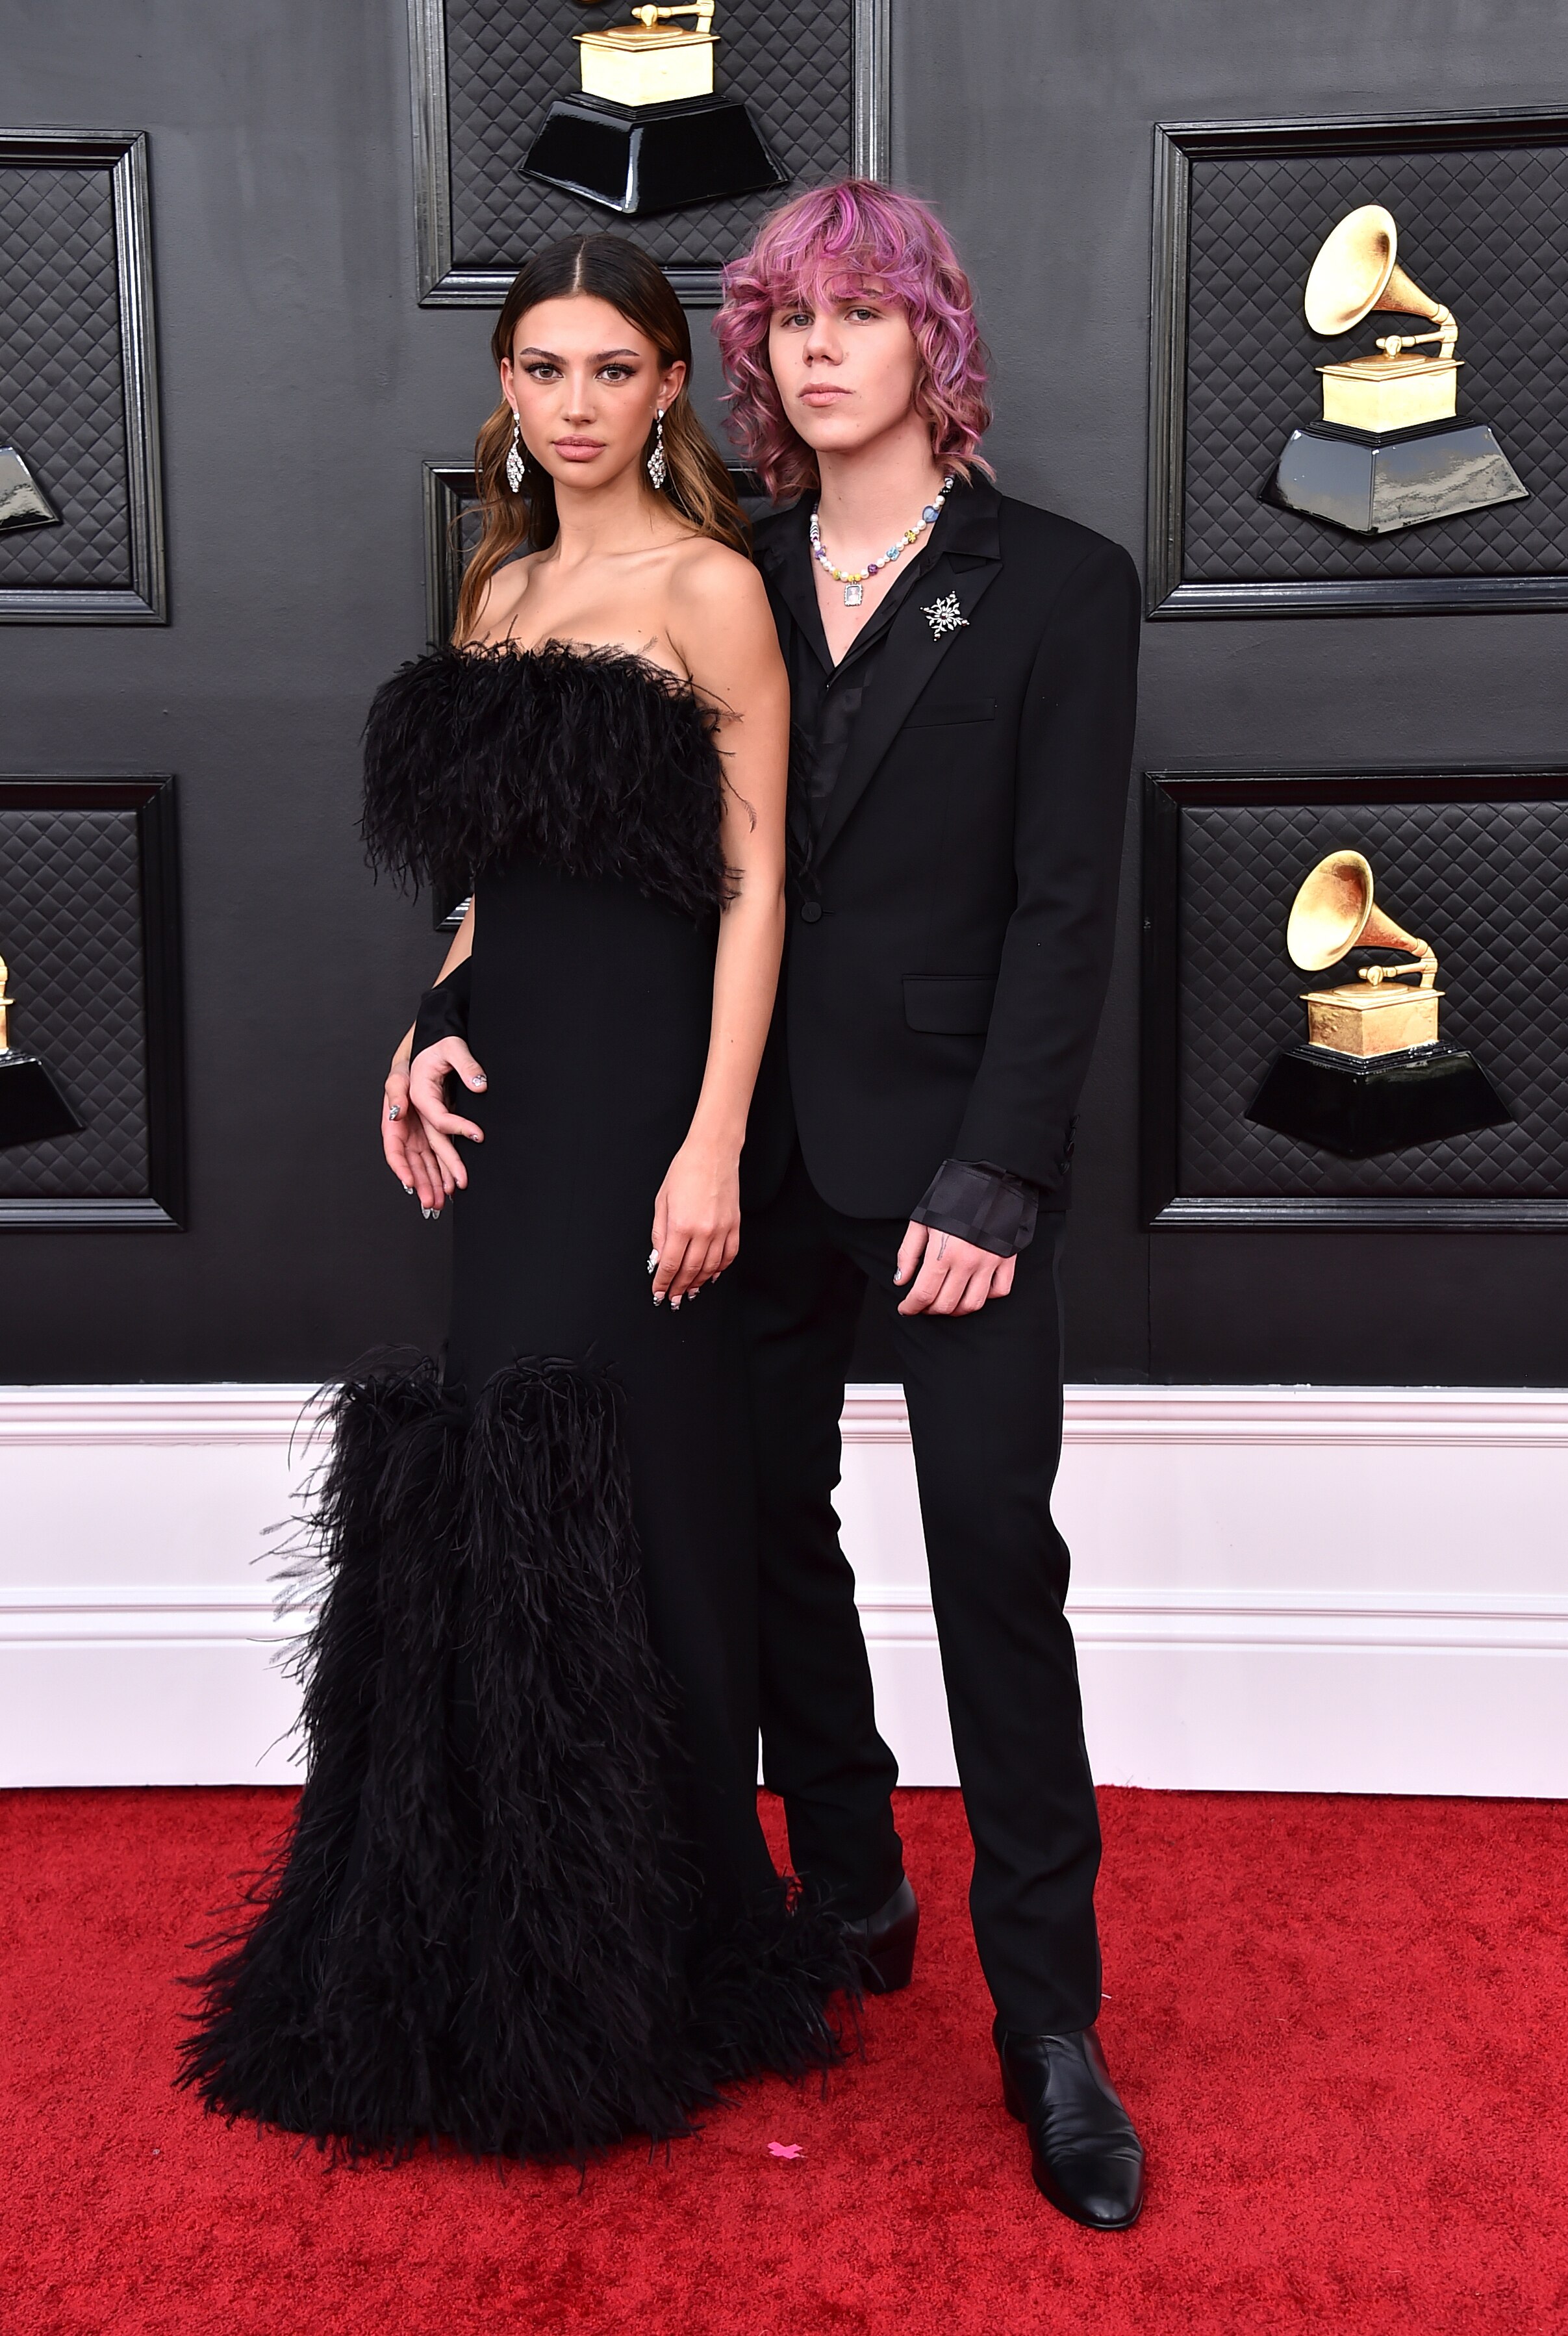 katarina deme in a black dress with feather detail and the kid laroi with pink hair in a black suit